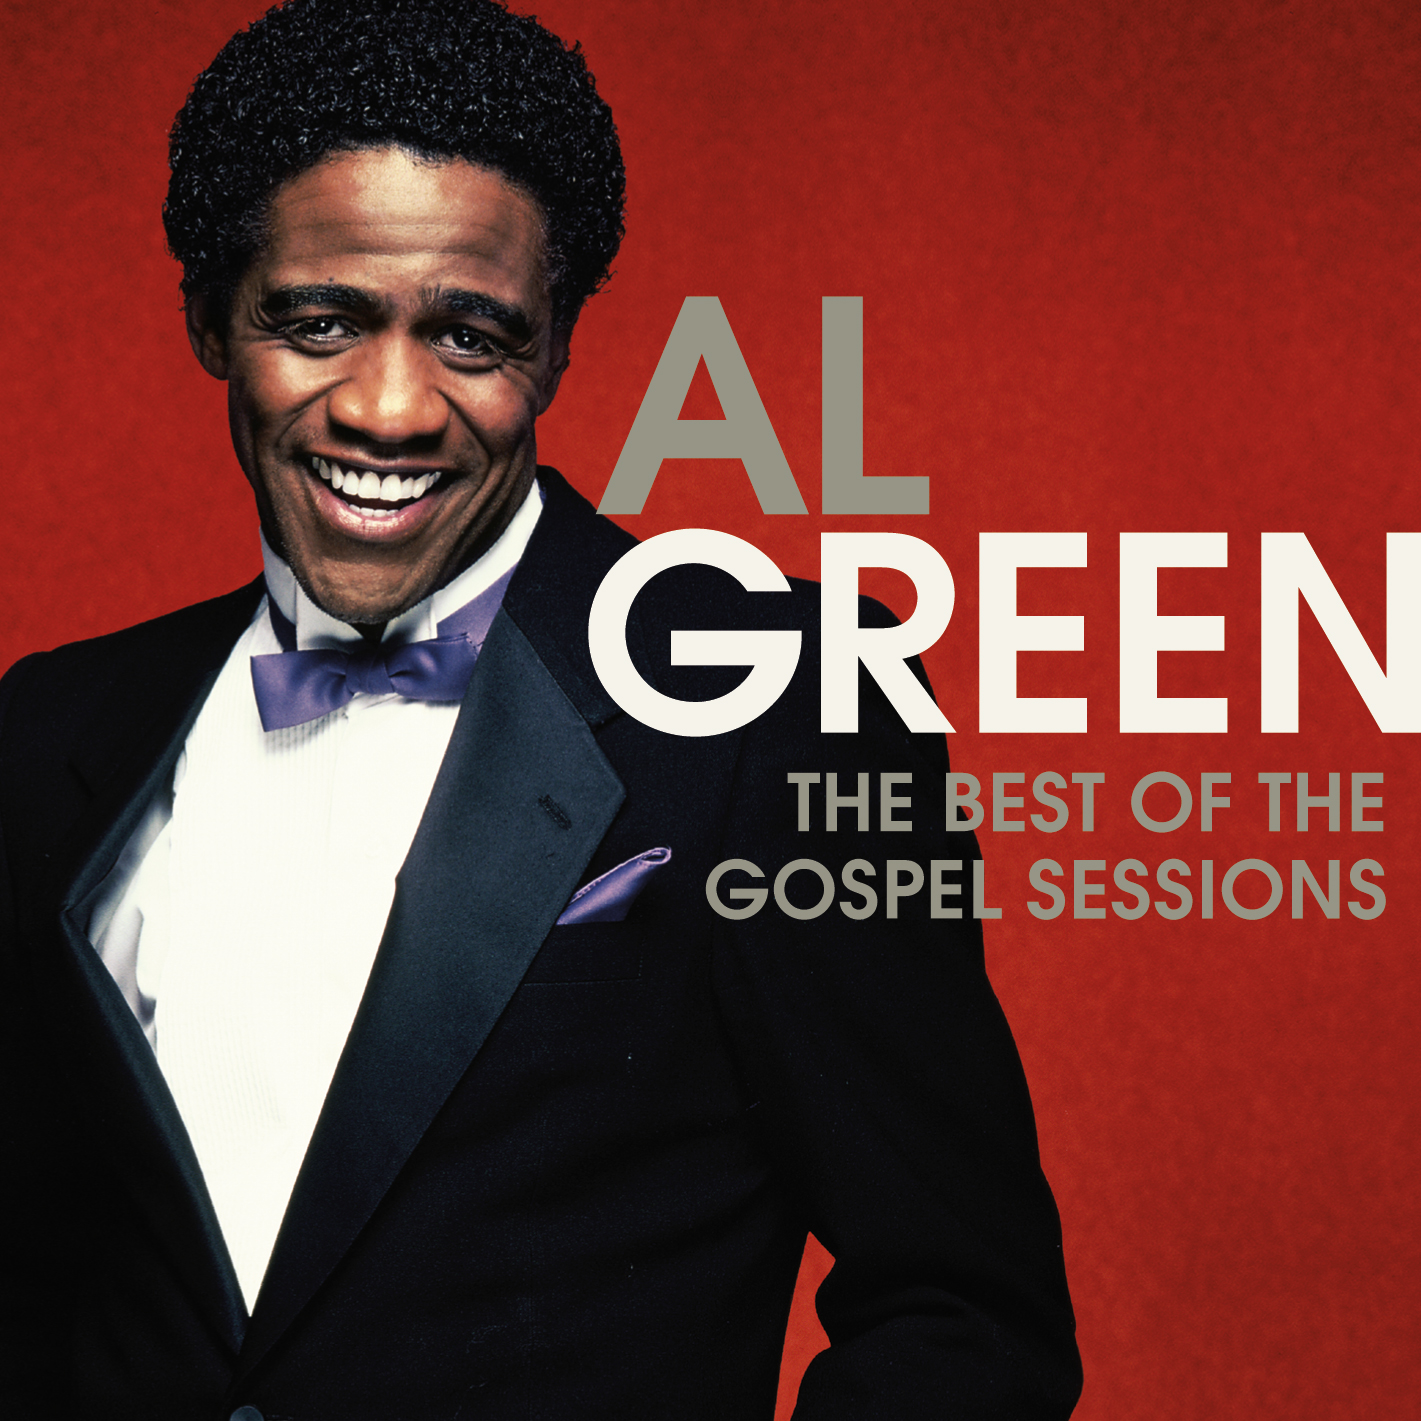 BEST OF THE GOSPEL SESSIONS